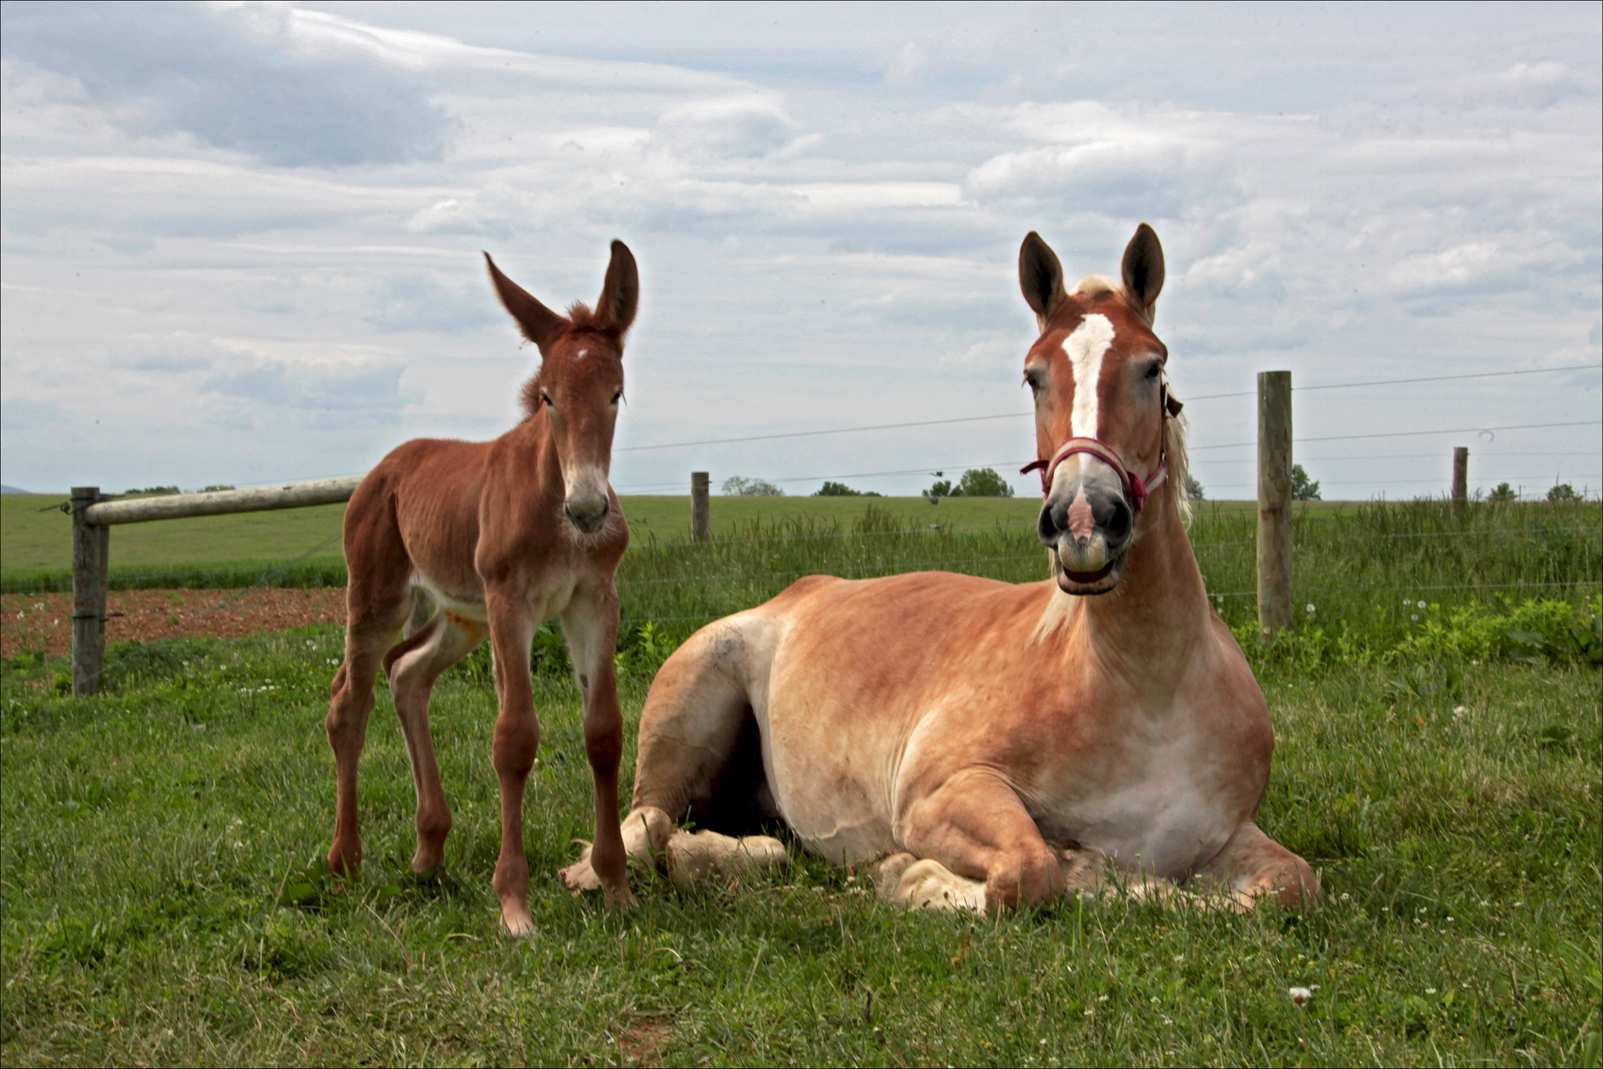 Mother and foal.